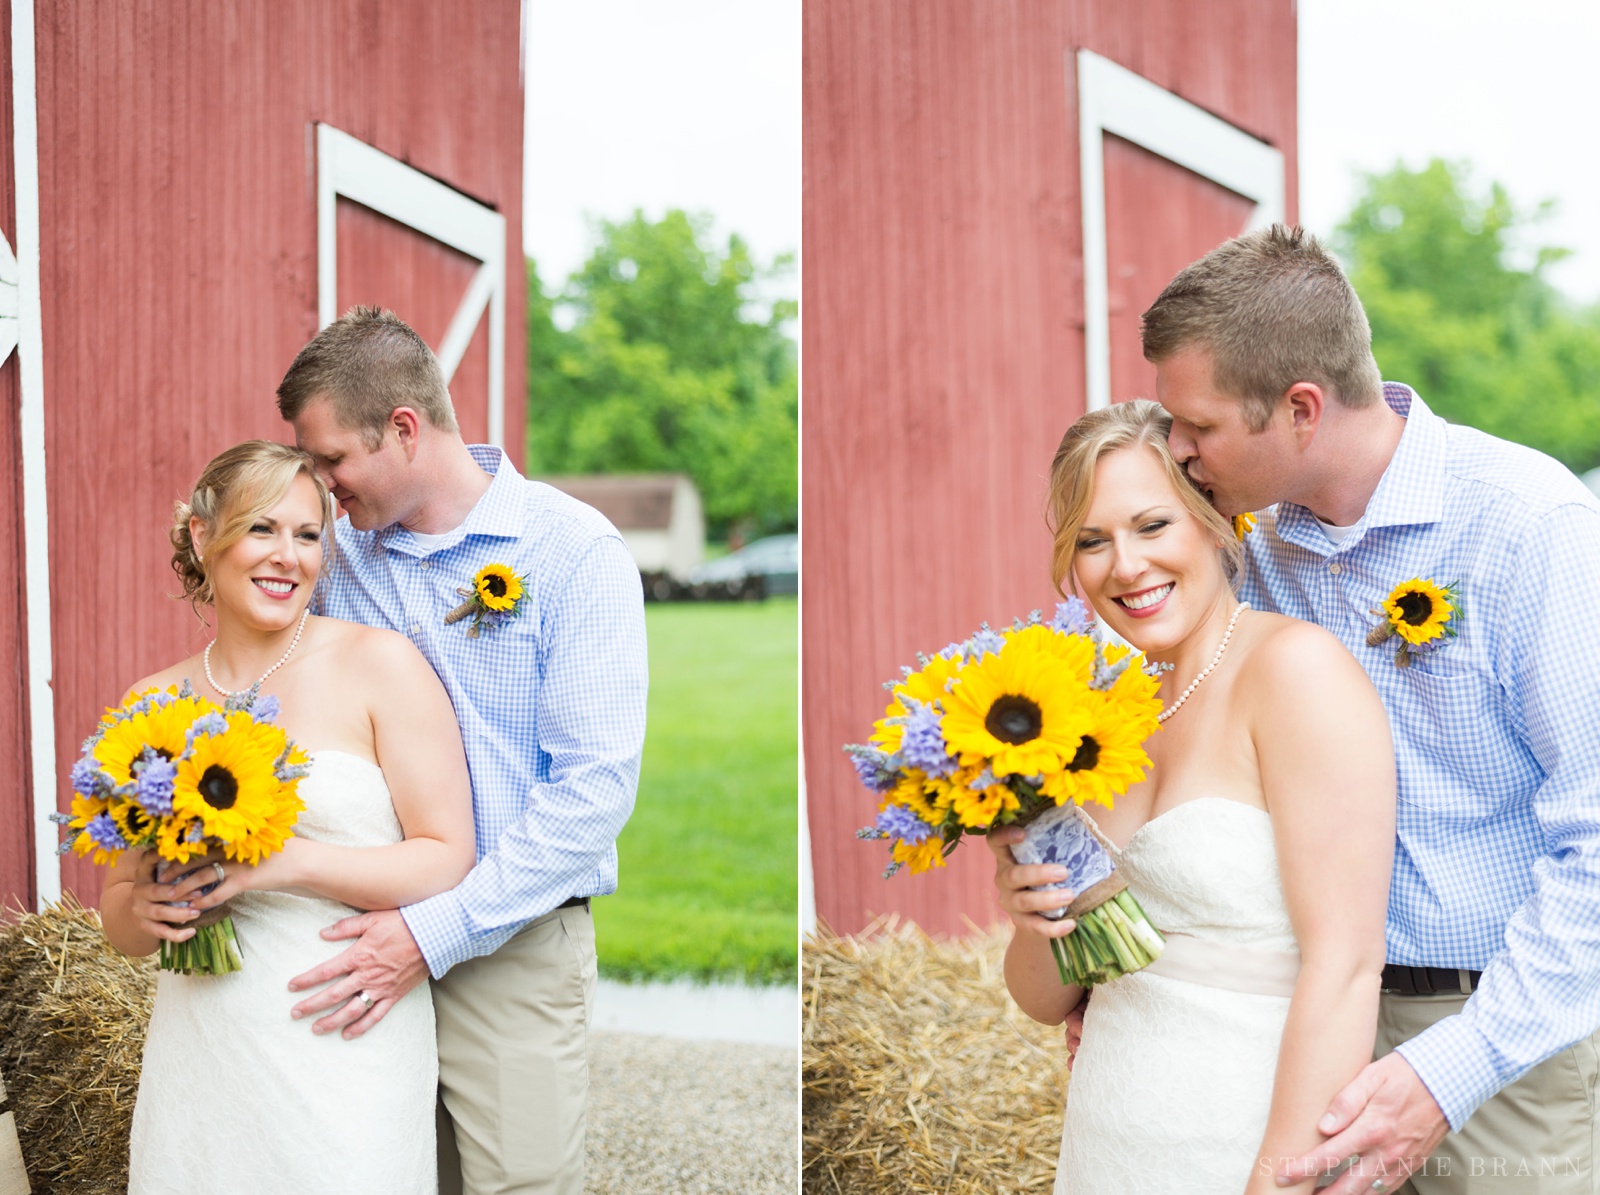 up-close-portraits-of-the-bride-and-groom